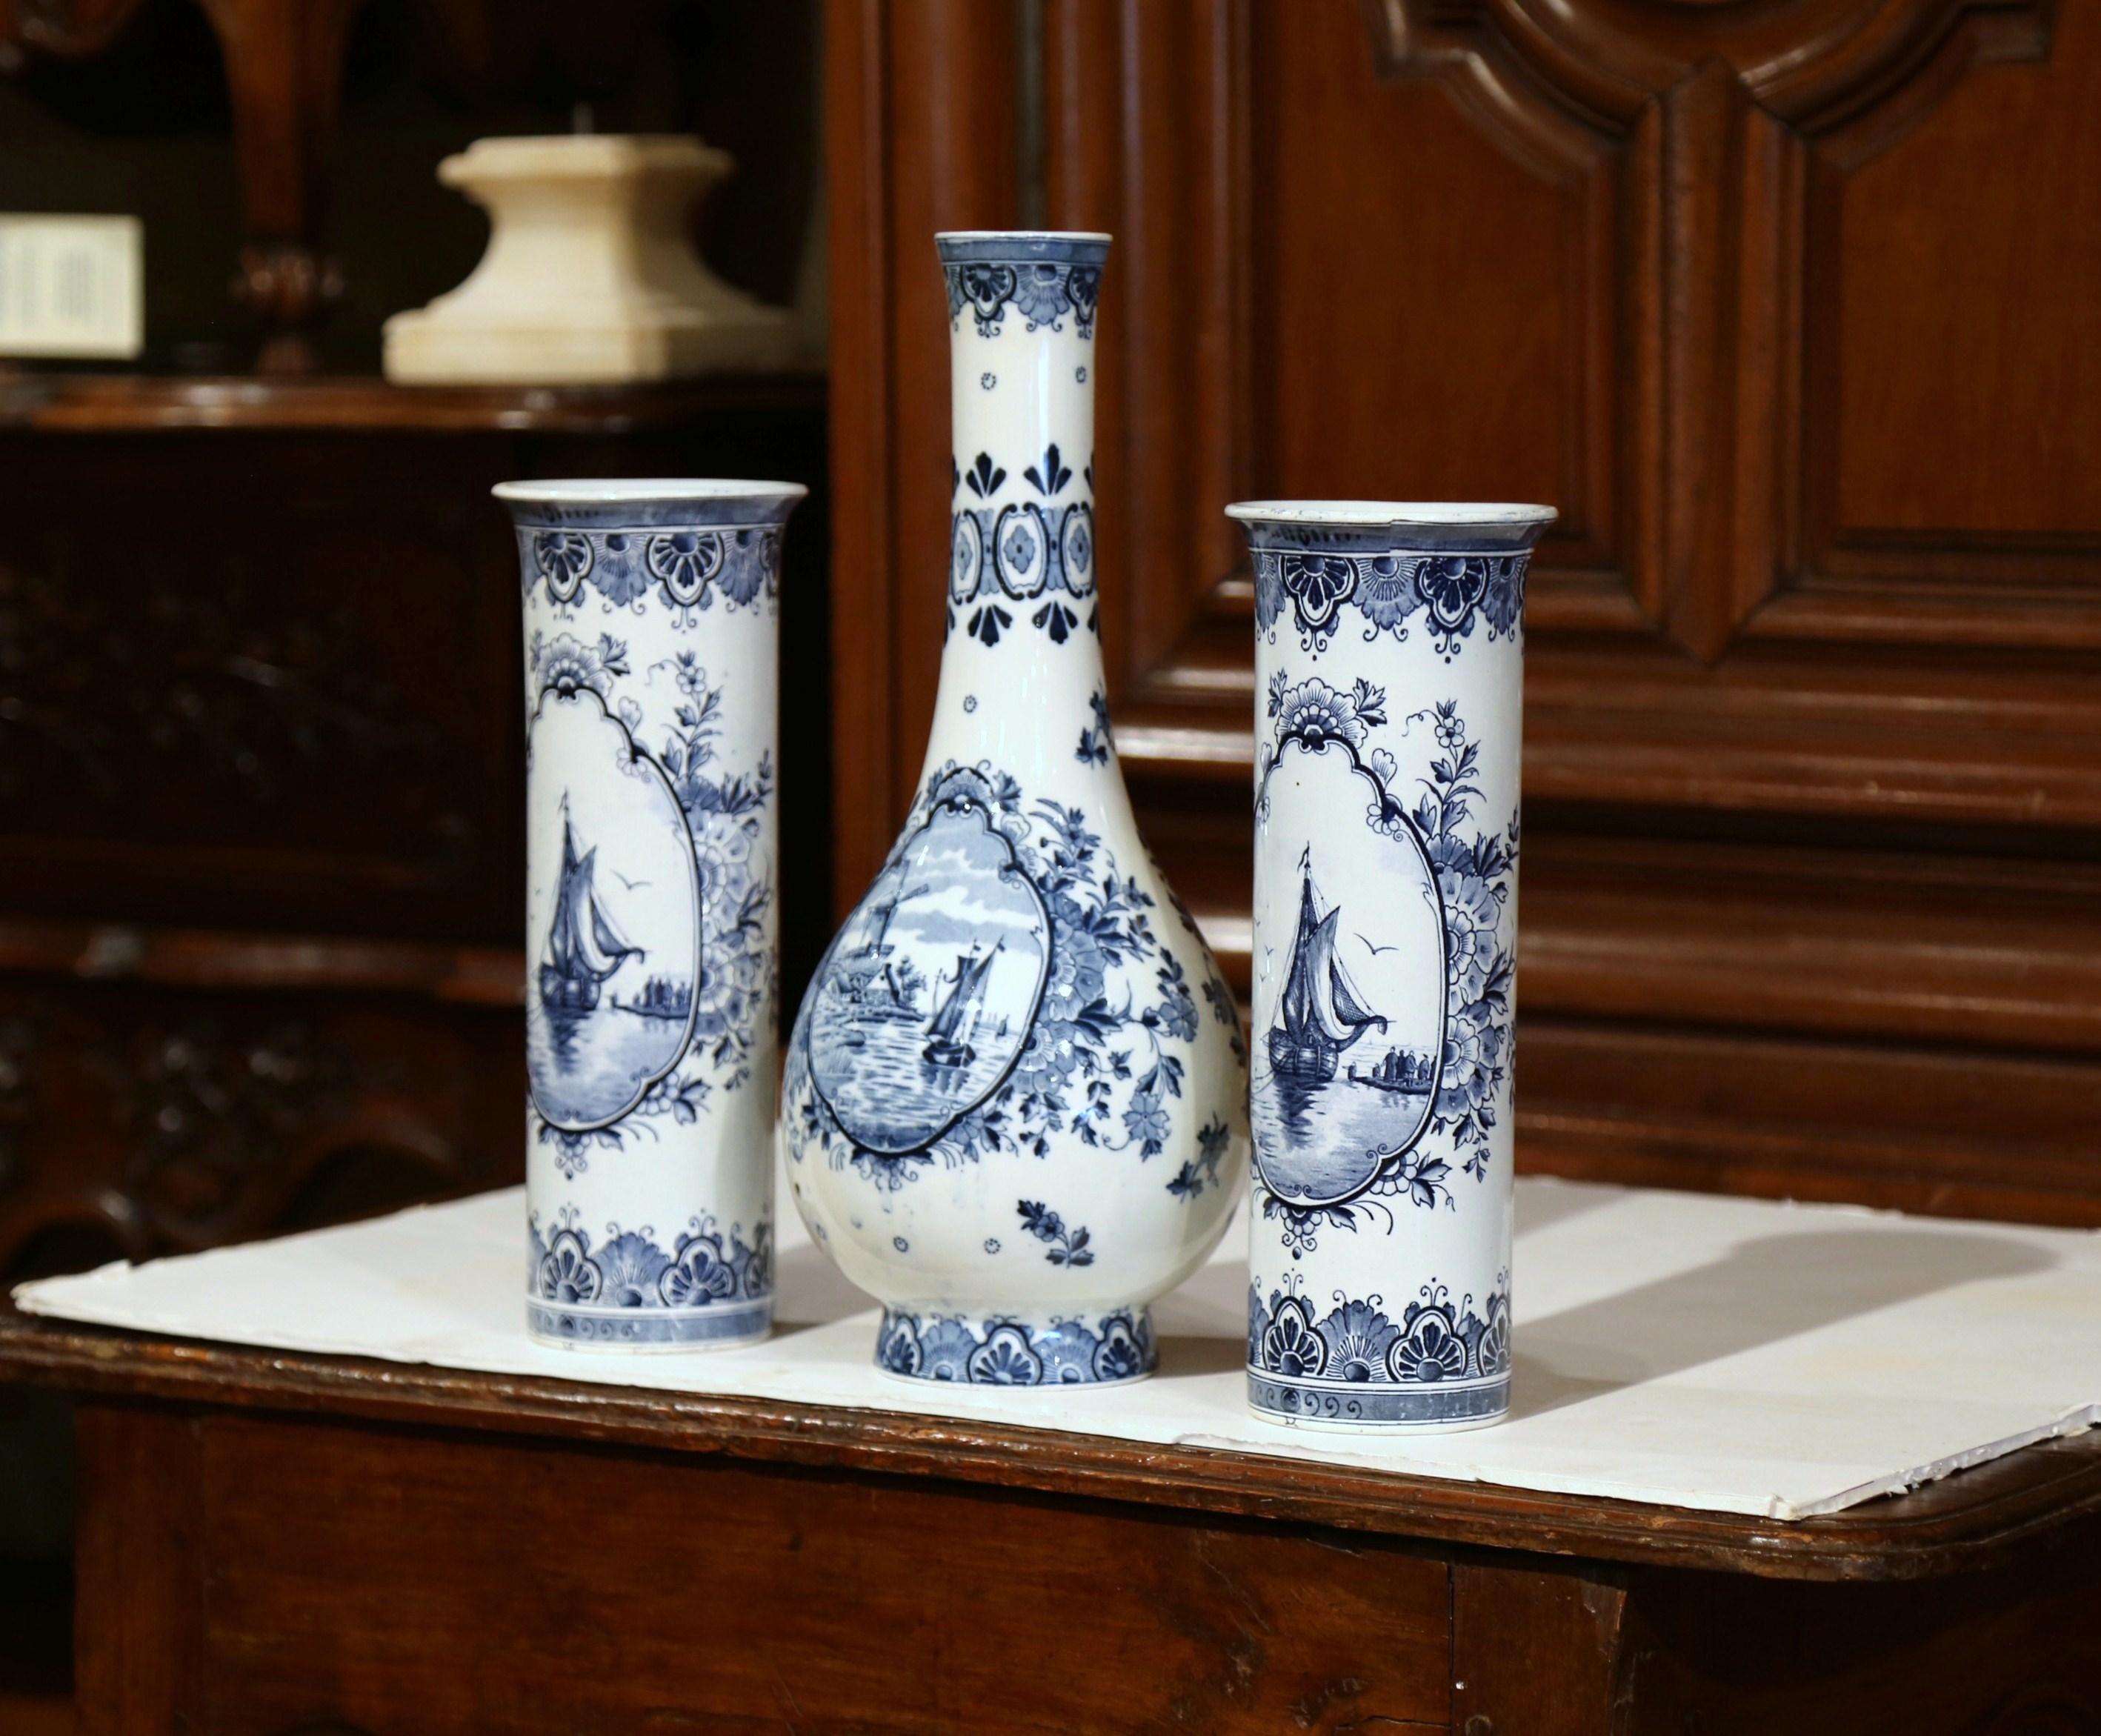 Decorate your mantel with this elegant set of porcelain Delft vases; crafted circa 1950, each hand-painted vase features a center sailboat on water medallion, embellished by floral decor in the blue and white palette. The tall center vase also